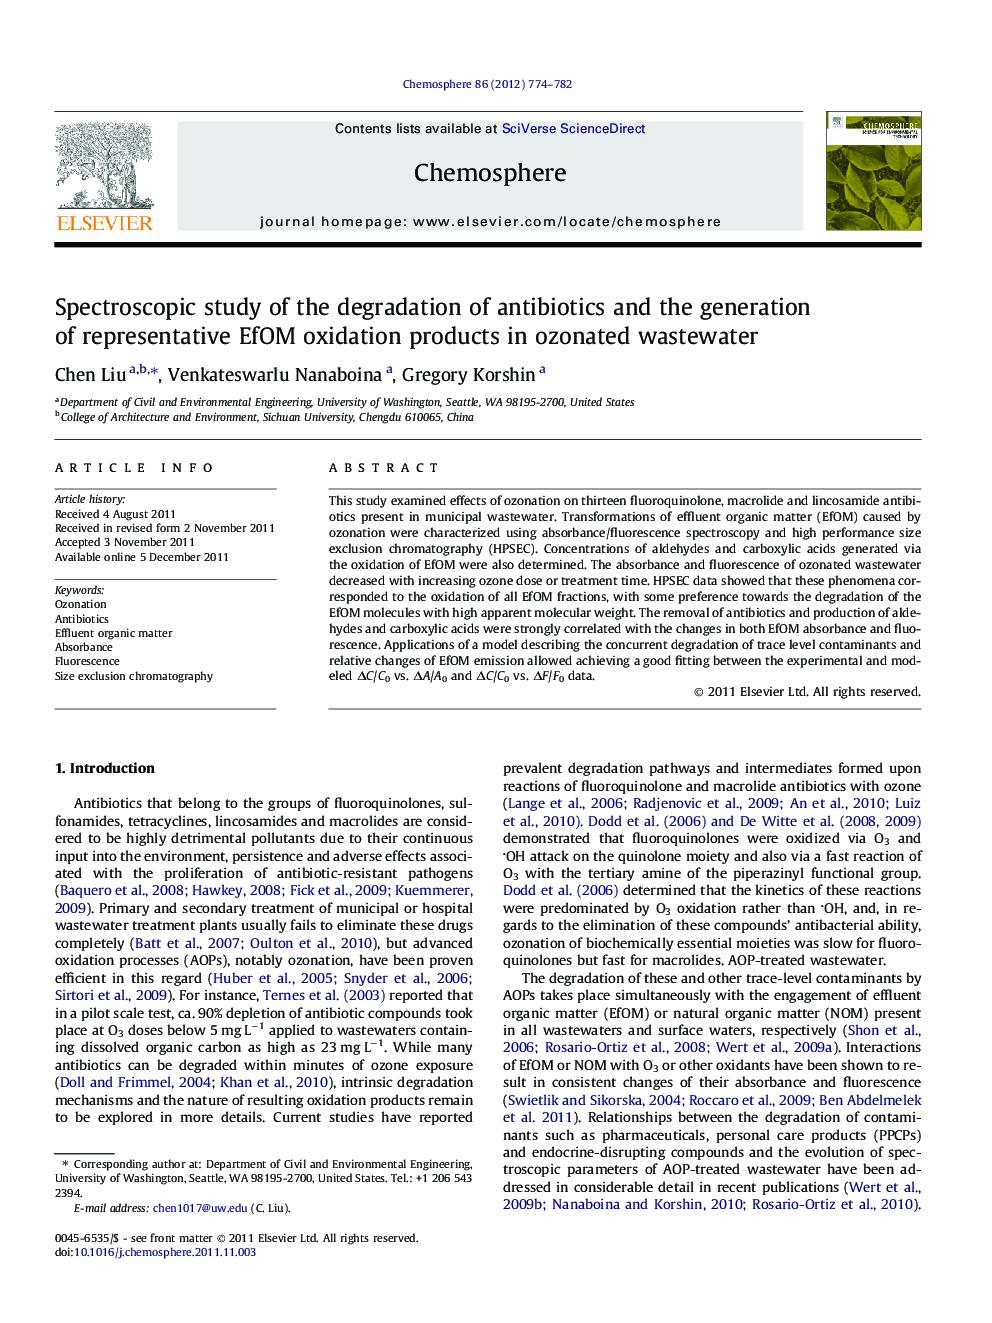 Spectroscopic study of the degradation of antibiotics and the generation of representative EfOM oxidation products in ozonated wastewater